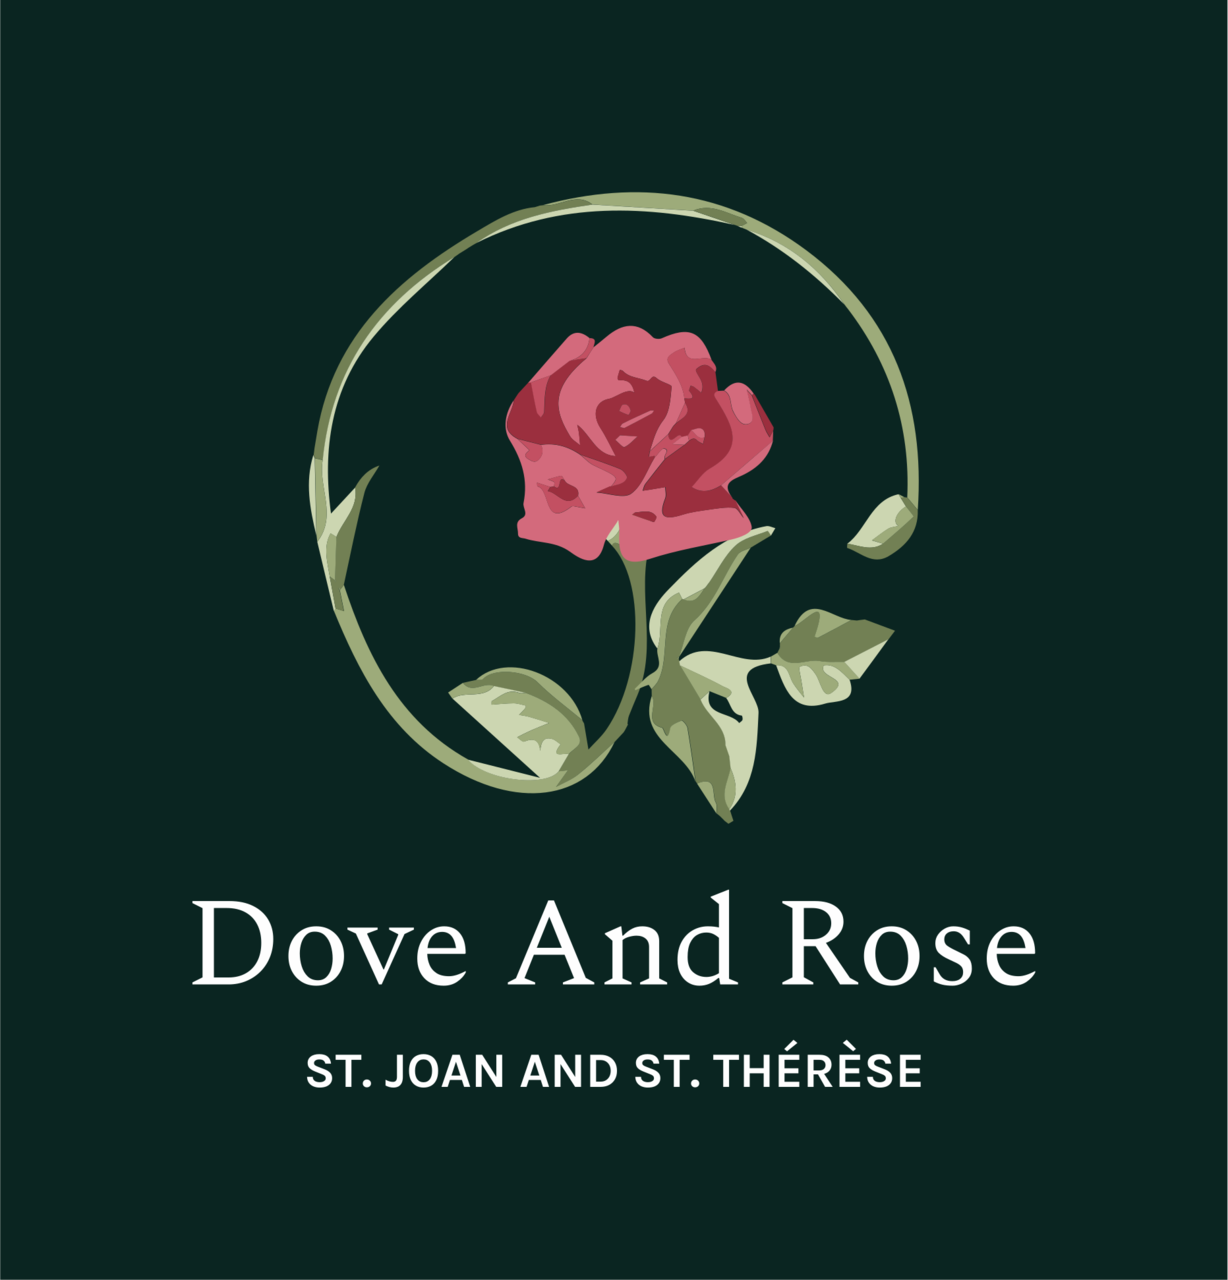 The Dove and Rose 